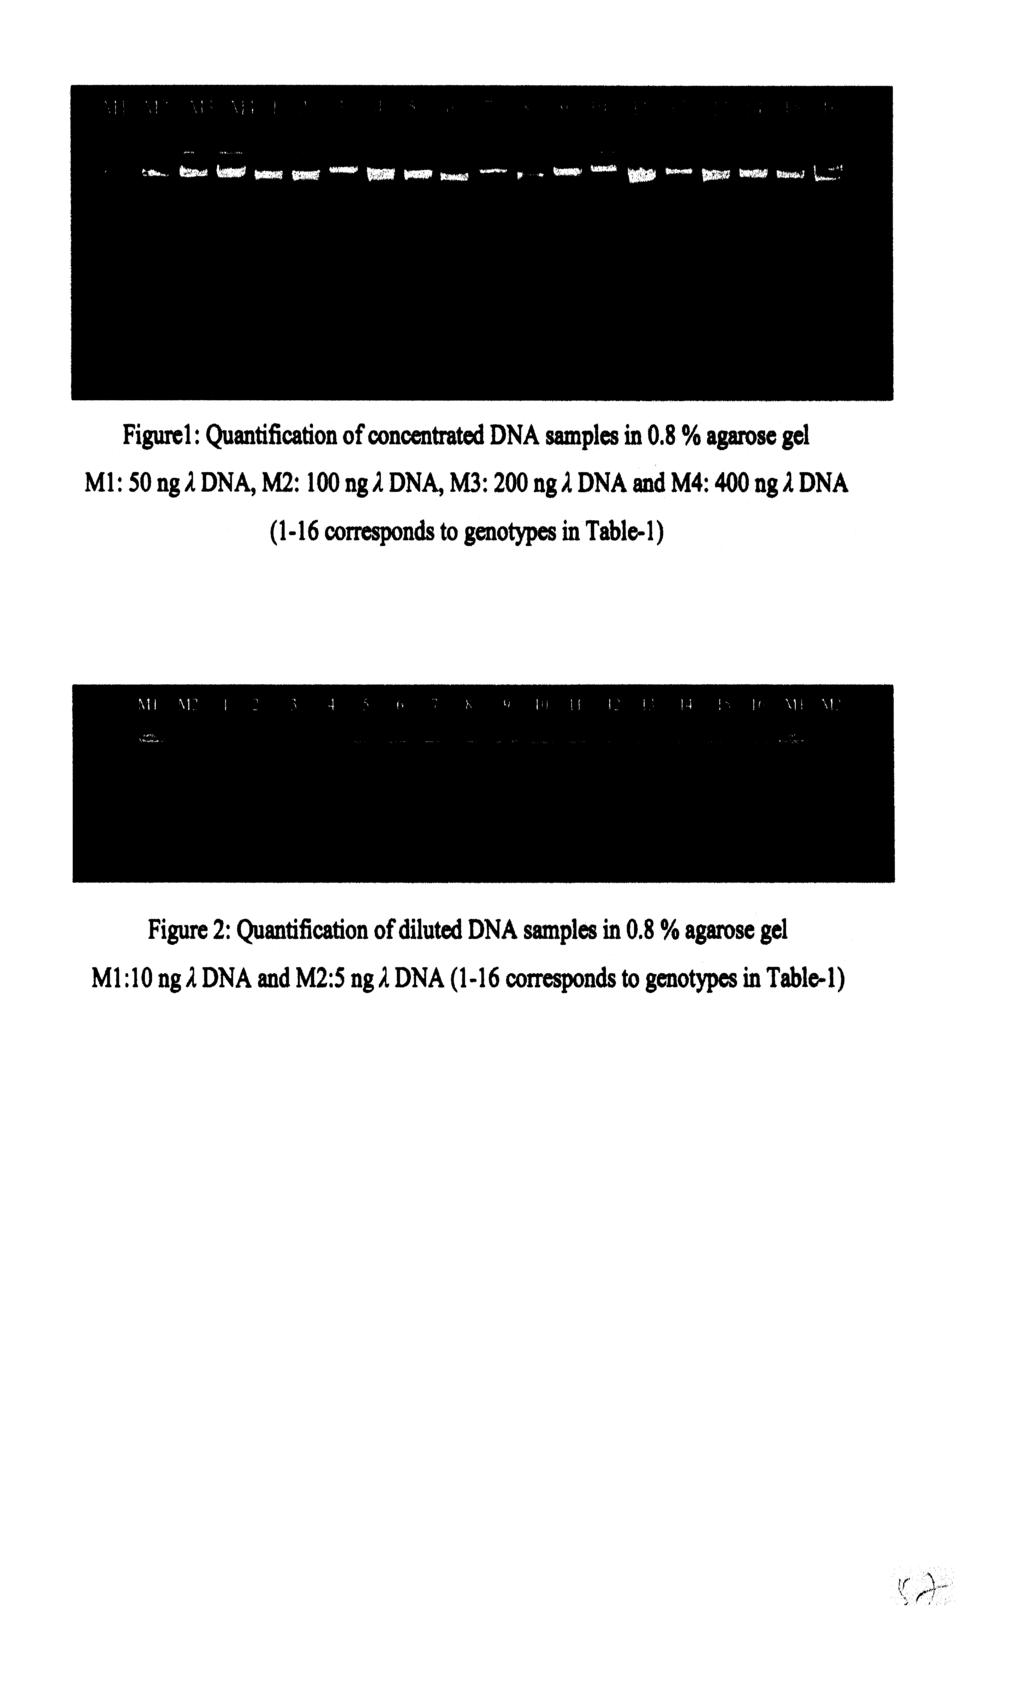 Figure1 : Quantification of concentrated DNA samples in 0.